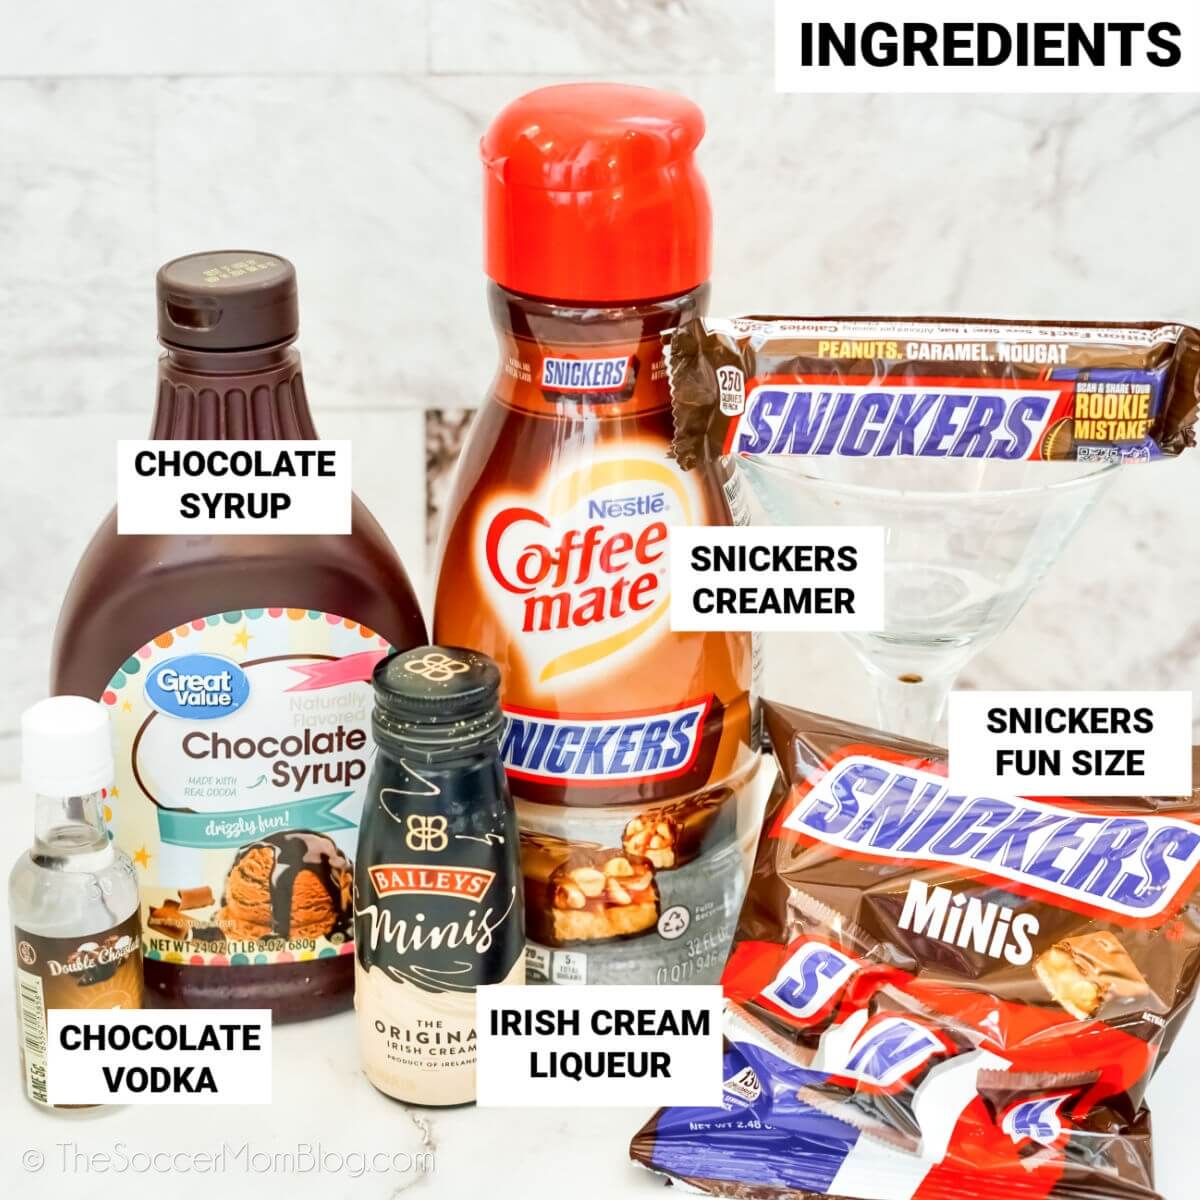 ingredients to make a Snickers flavored martini, with text labels